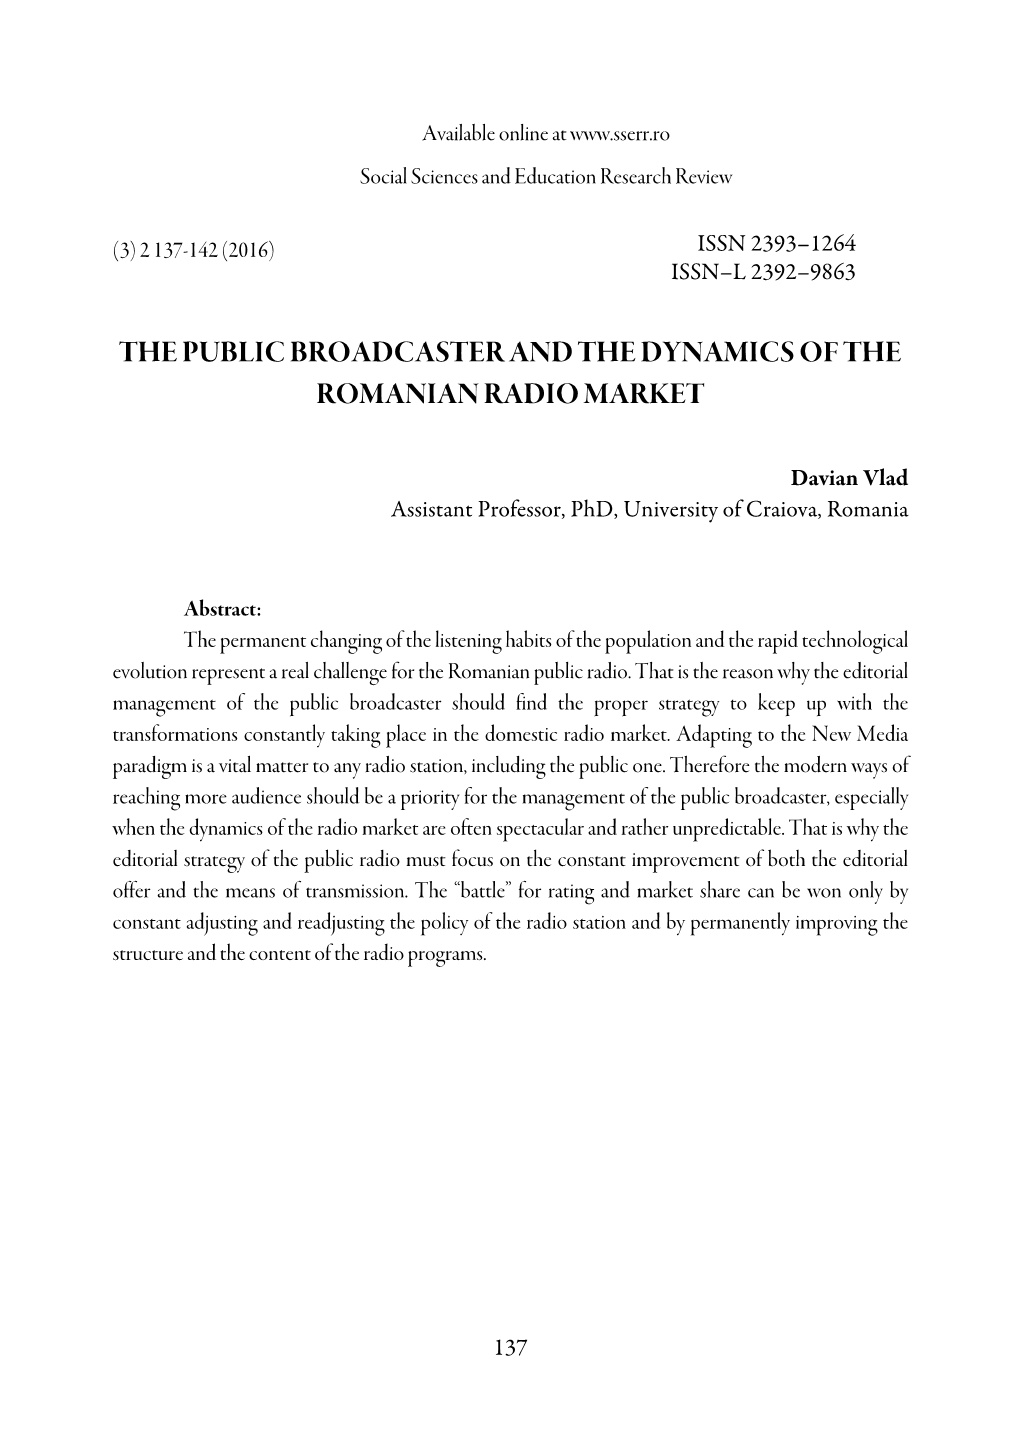 The Public Broadcaster and the Dynamics of the Romanian Radio Market